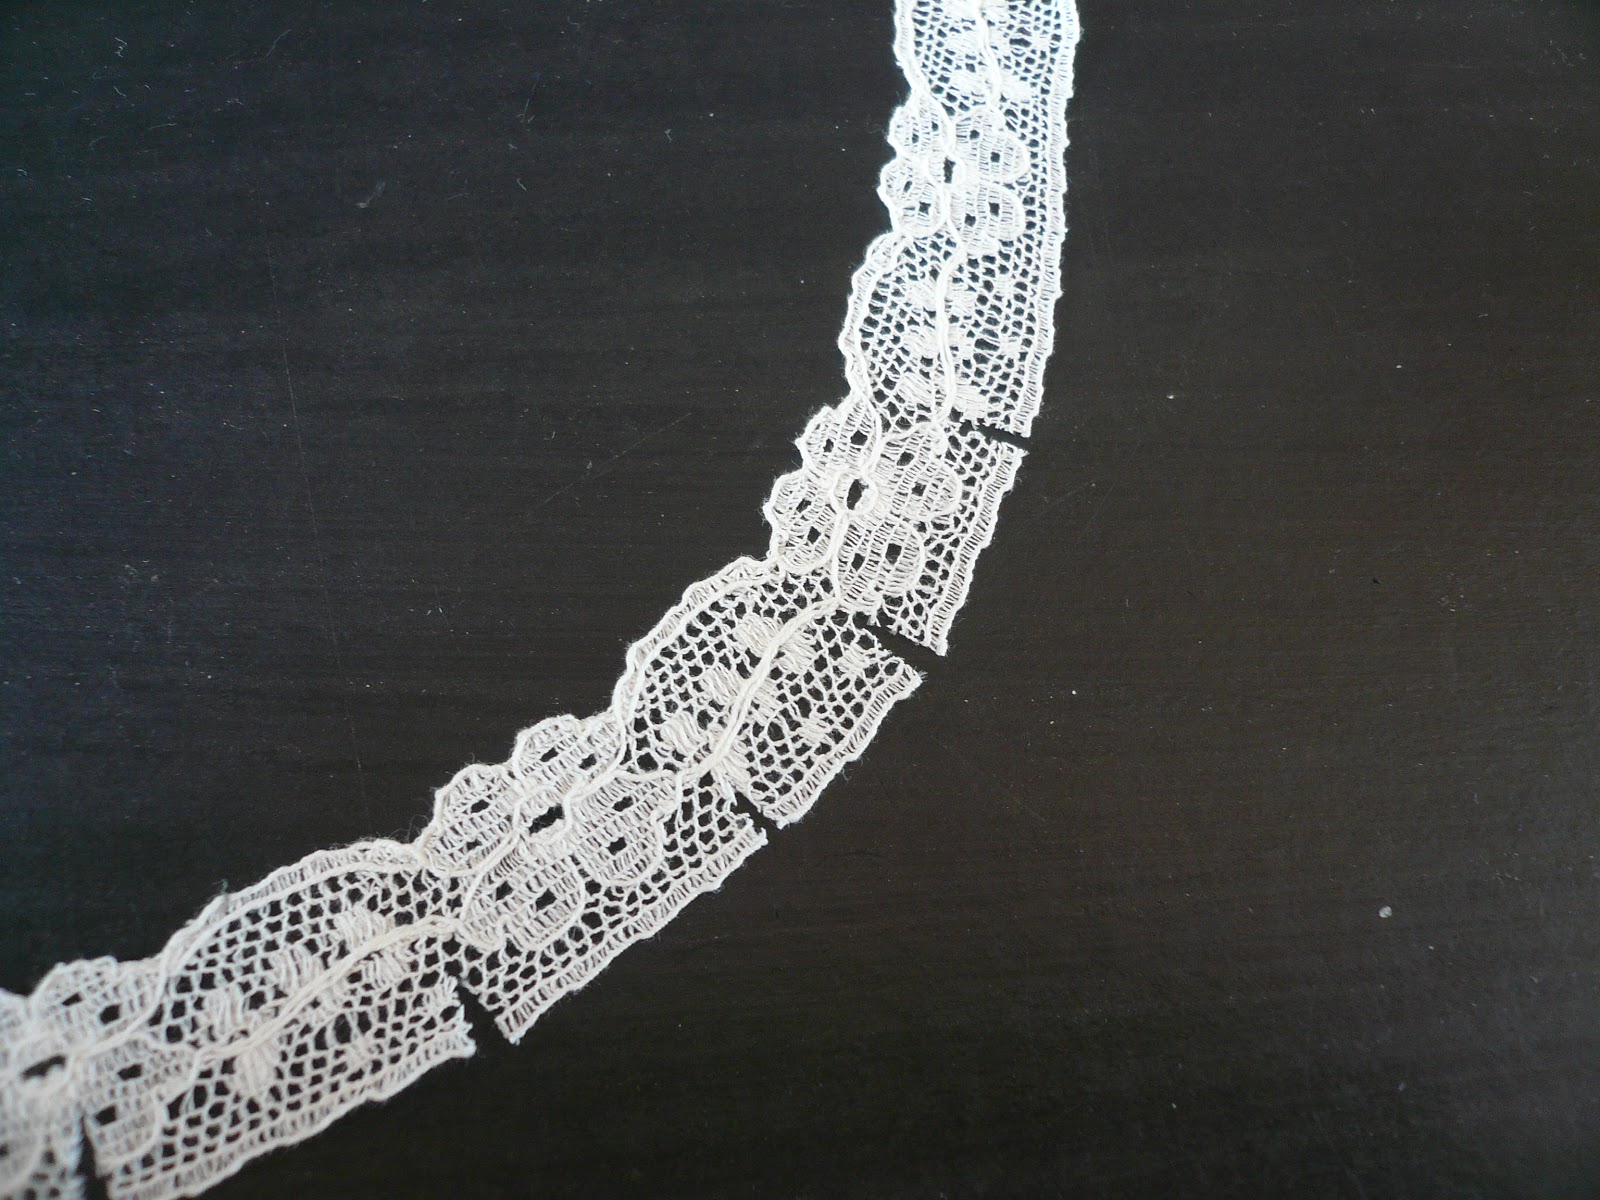 How to Sew Lace Trim